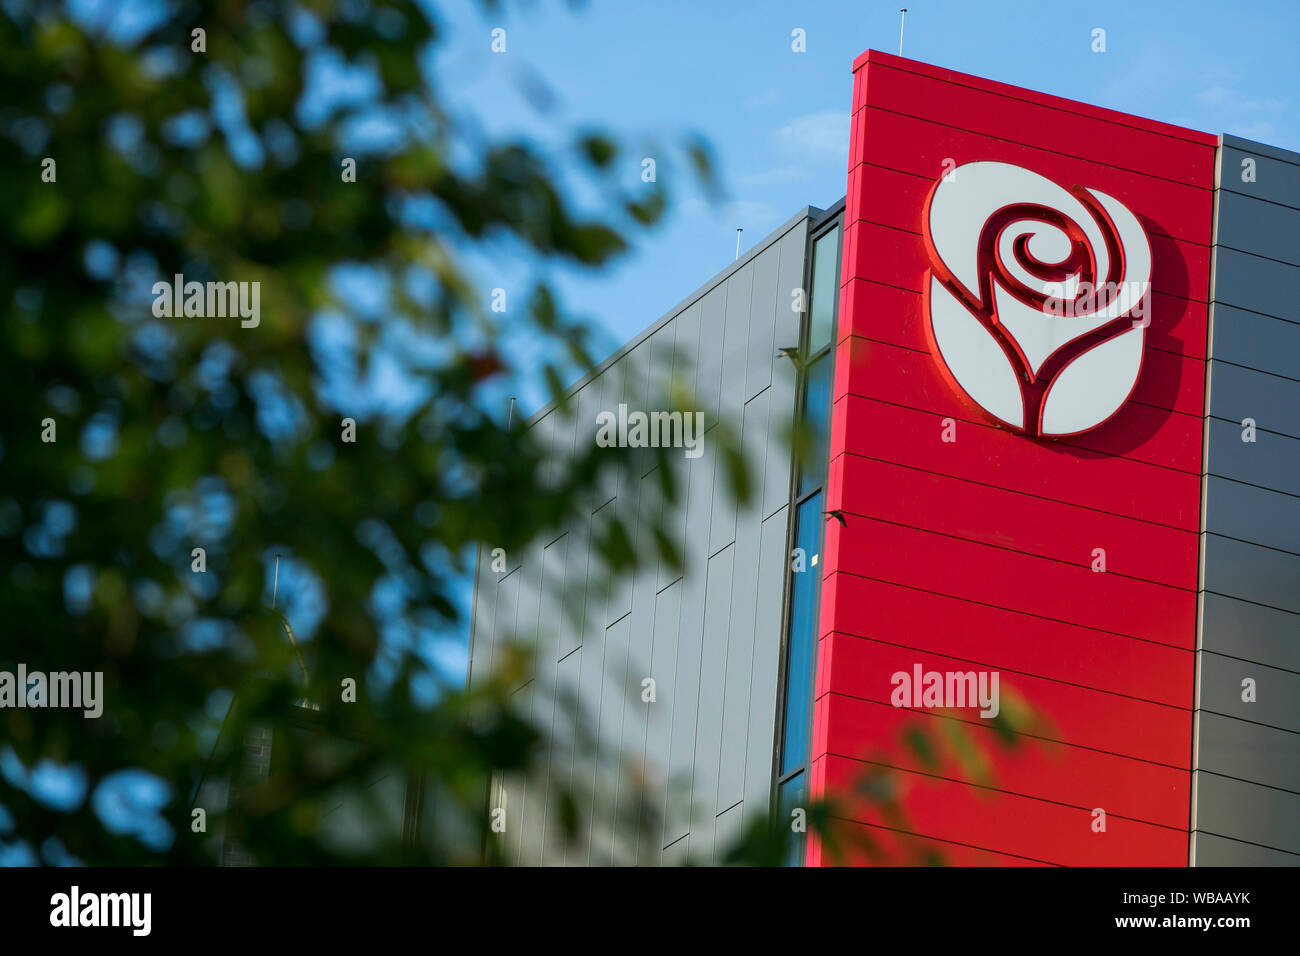 A logo sign outside of the headquarters of the American Greetings Corporation in Westlake, Ohio on August 11, 2019. Stock Photo